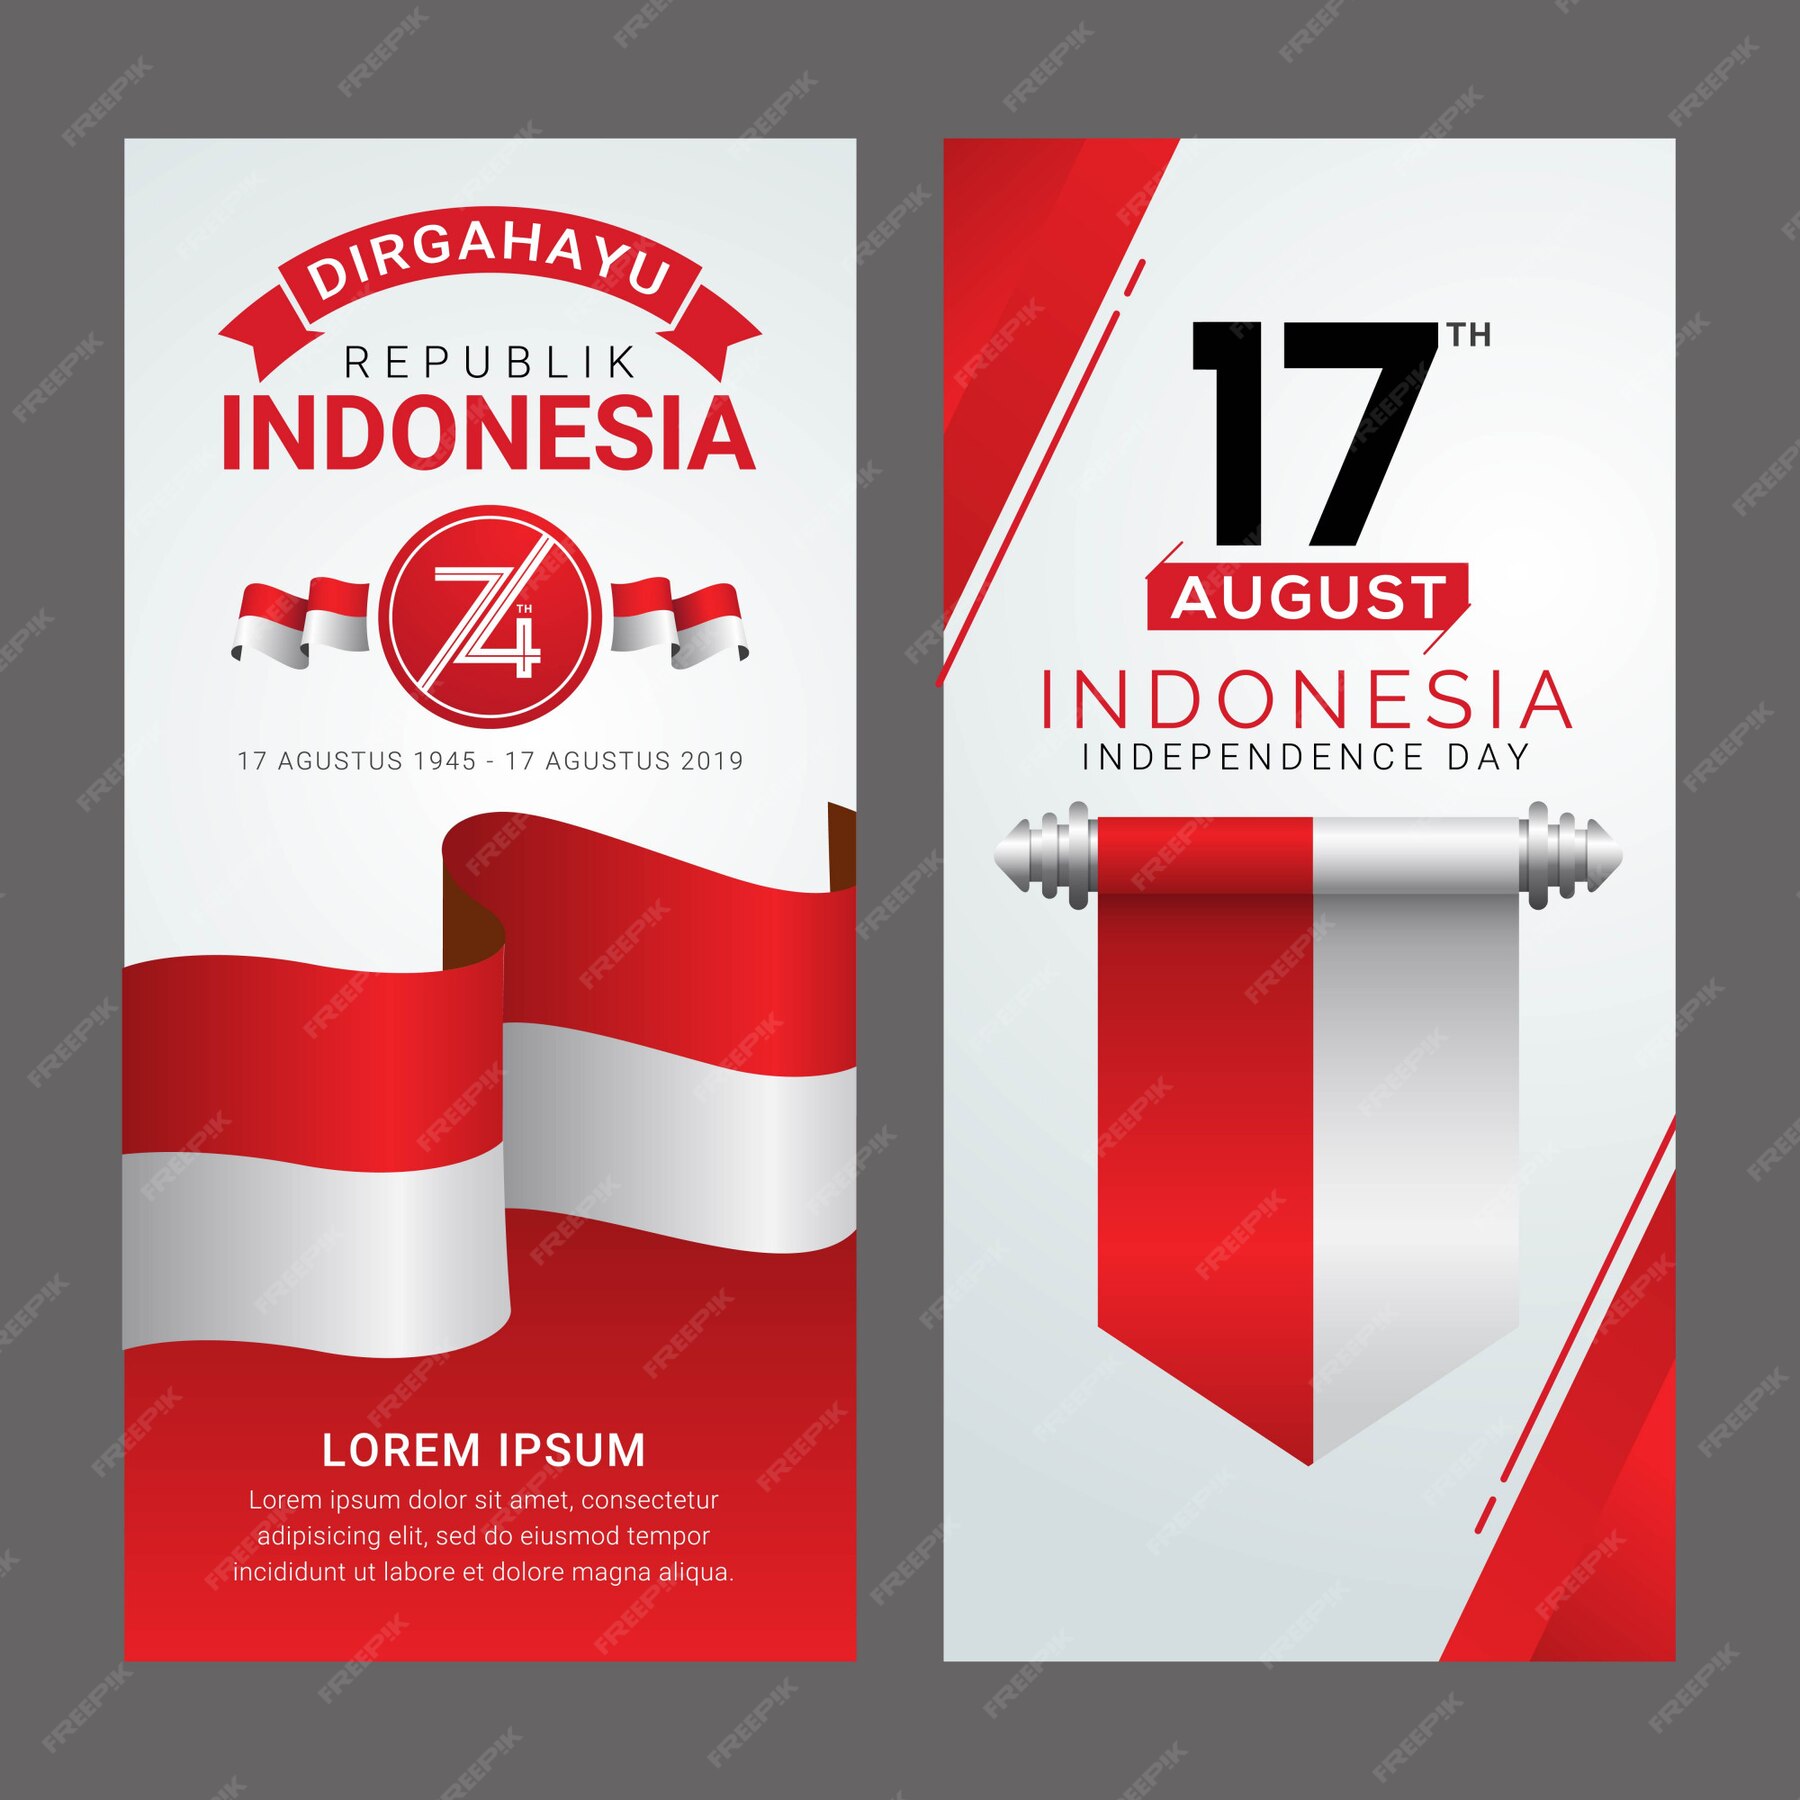 Premium Vector Happy Indonesia Independence Day Greeting Card 1297